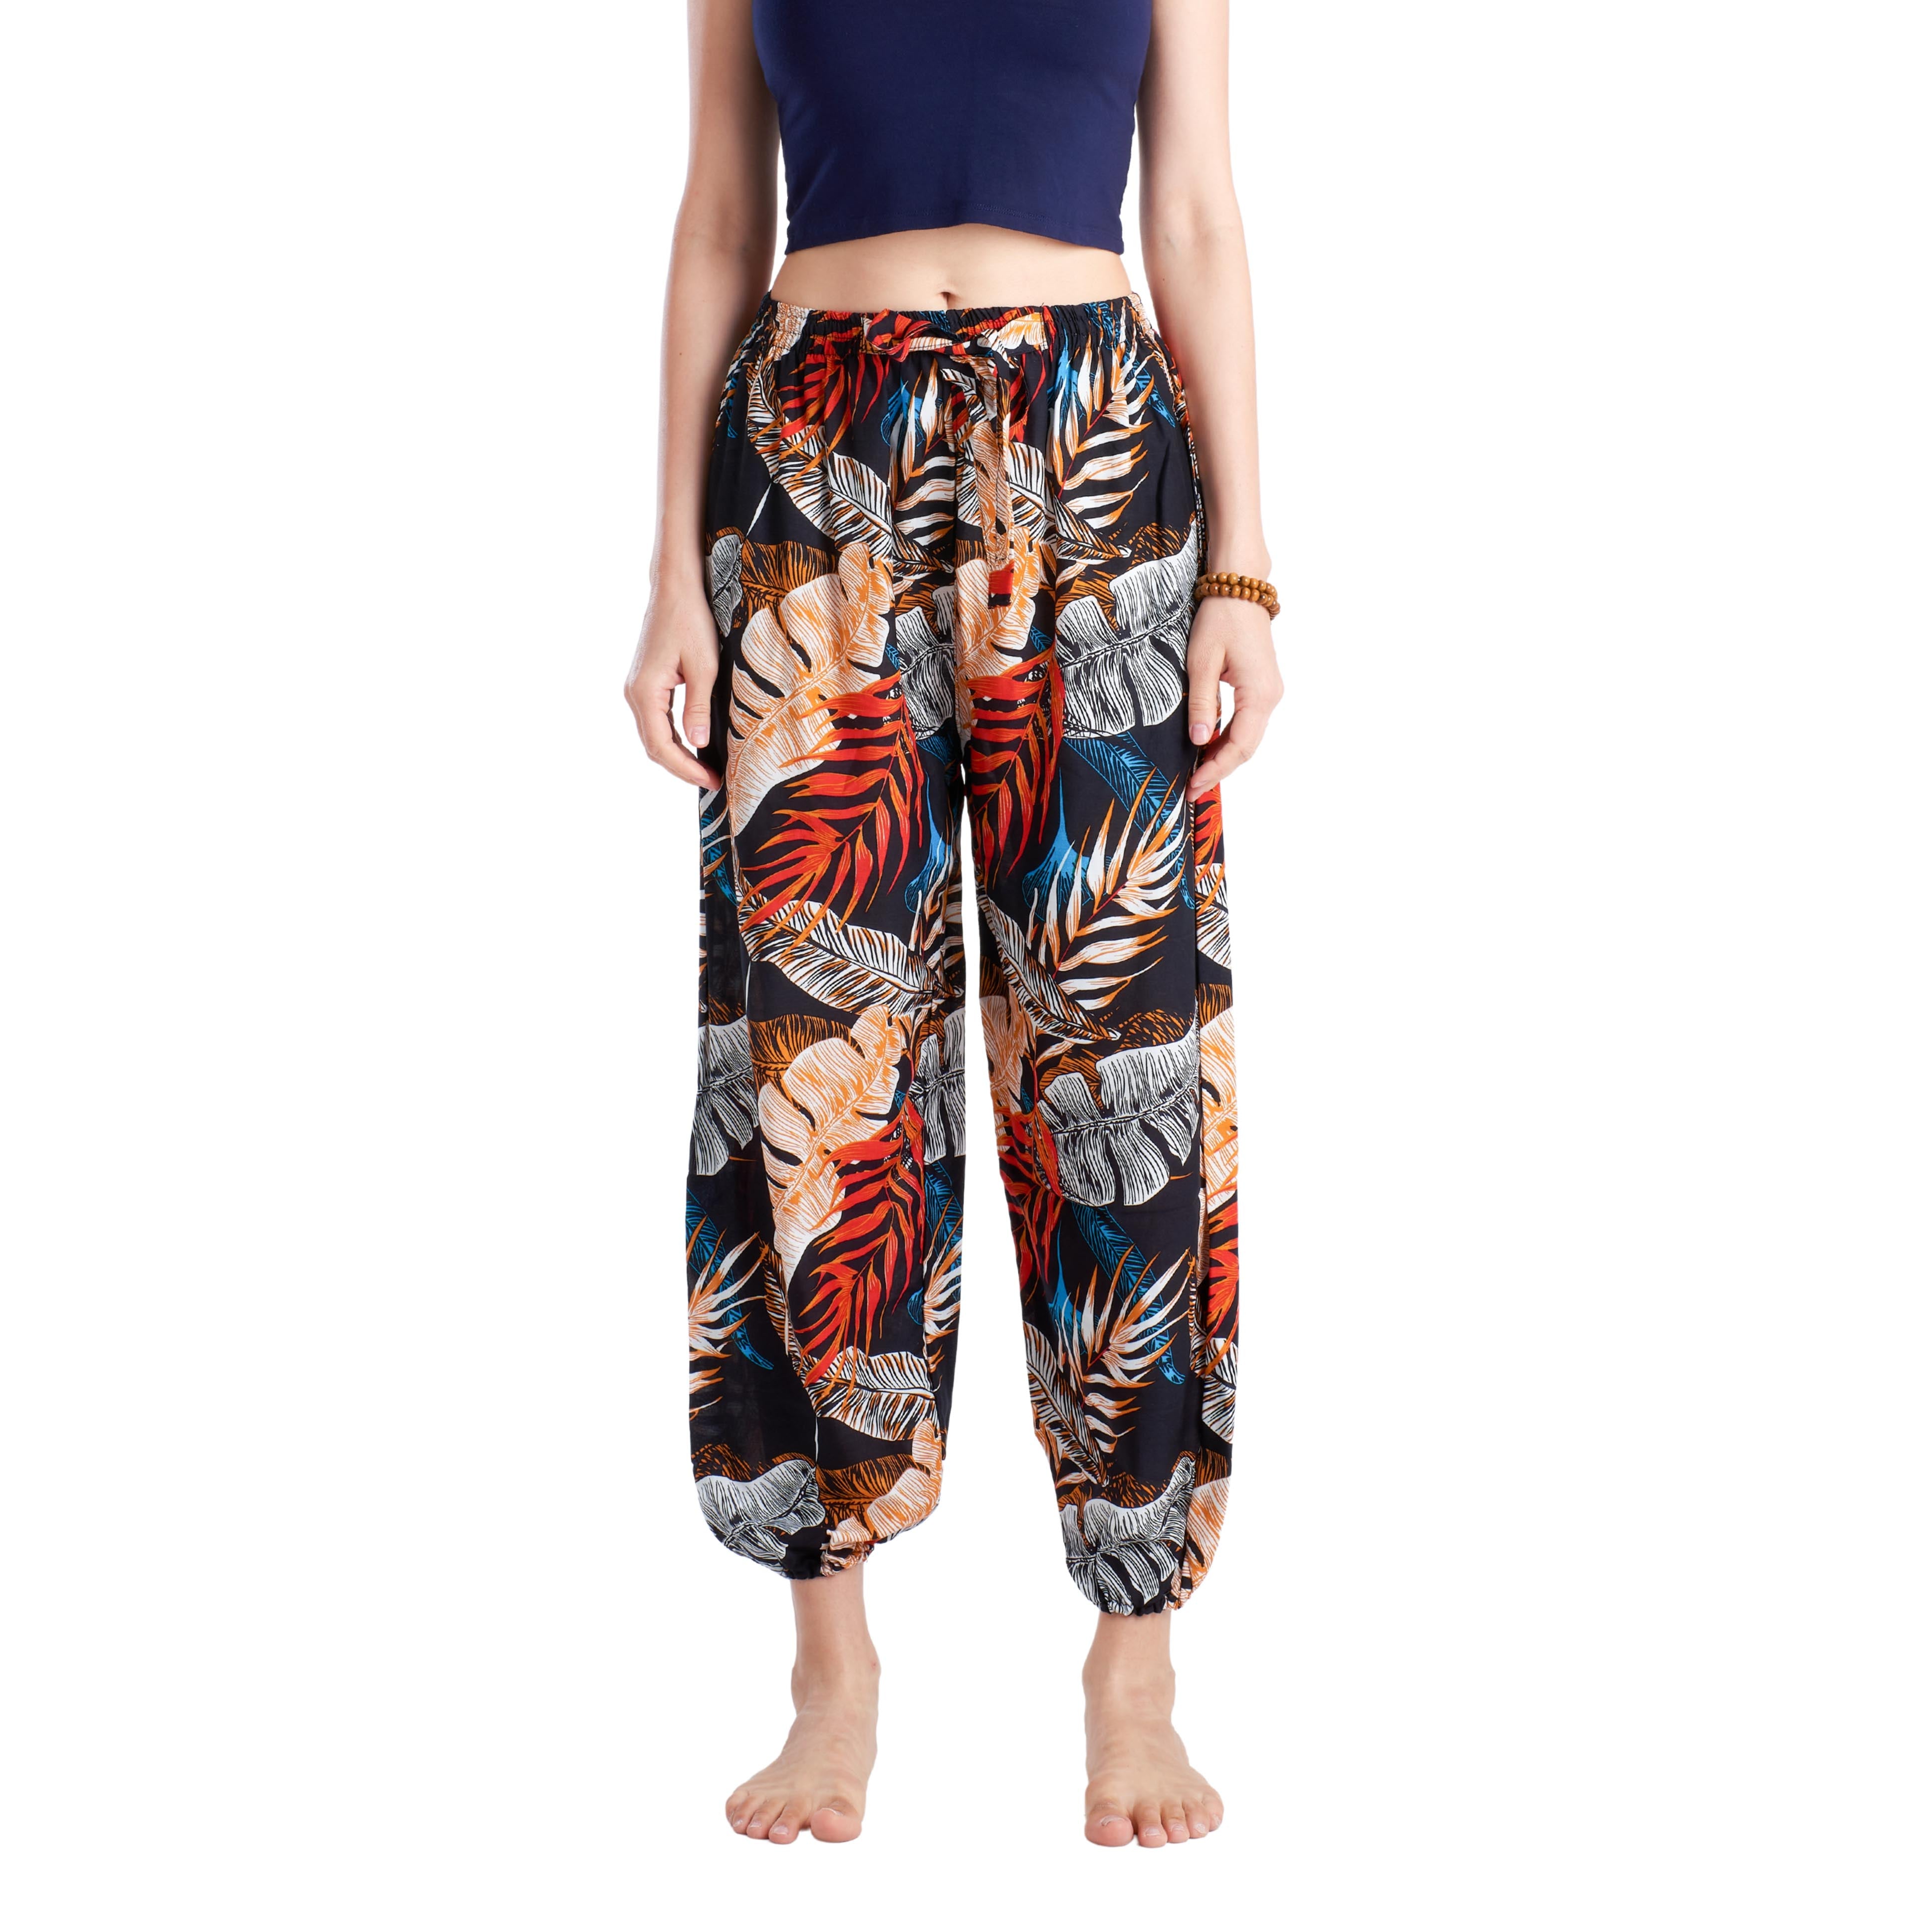 ALUX PANTS - Drawstring Elepanta Drawstring Pants - Buy Today Elephant Pants Jewelry And Bohemian Clothes Handmade In Thailand Help To Save The Elephants FairTrade And Vegan